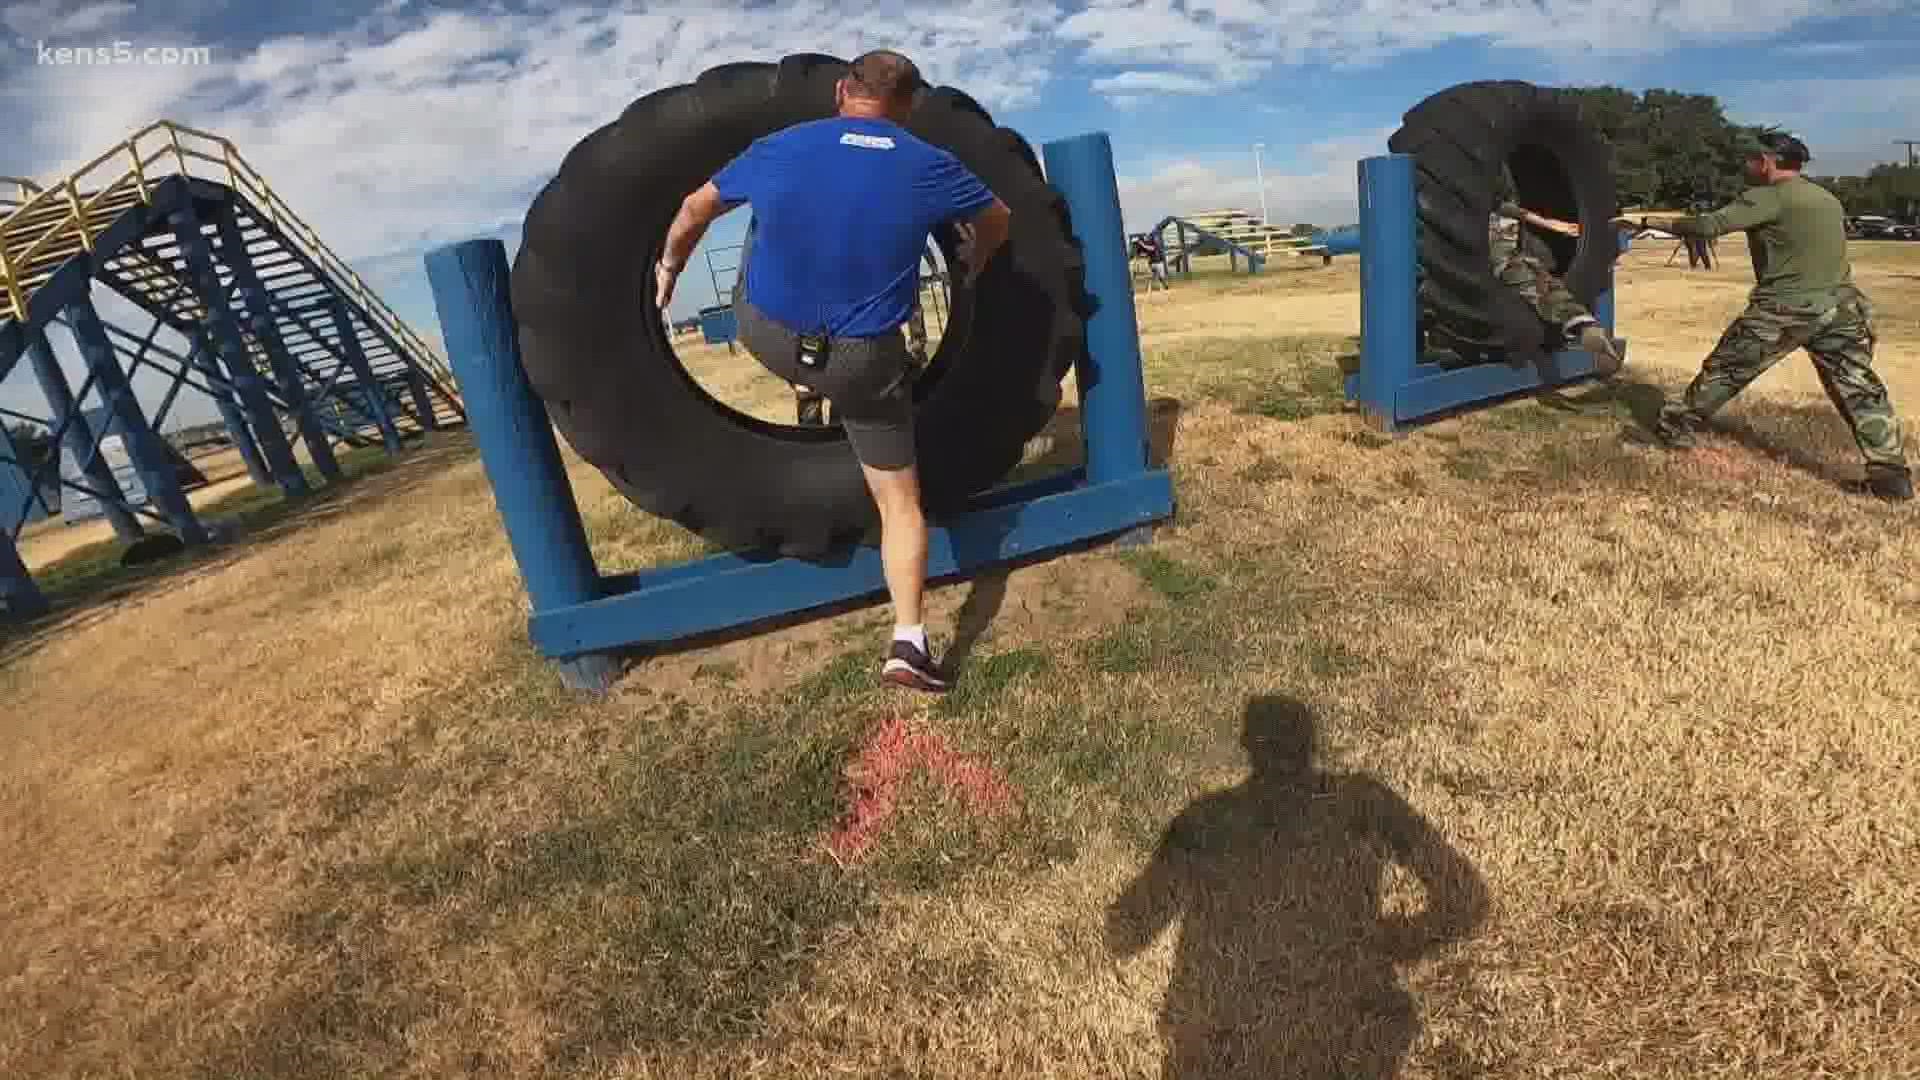 Tag along as Barry and Paul try to take on some of San Antonio's finest – in a course designed to test their agility, speed and strength.